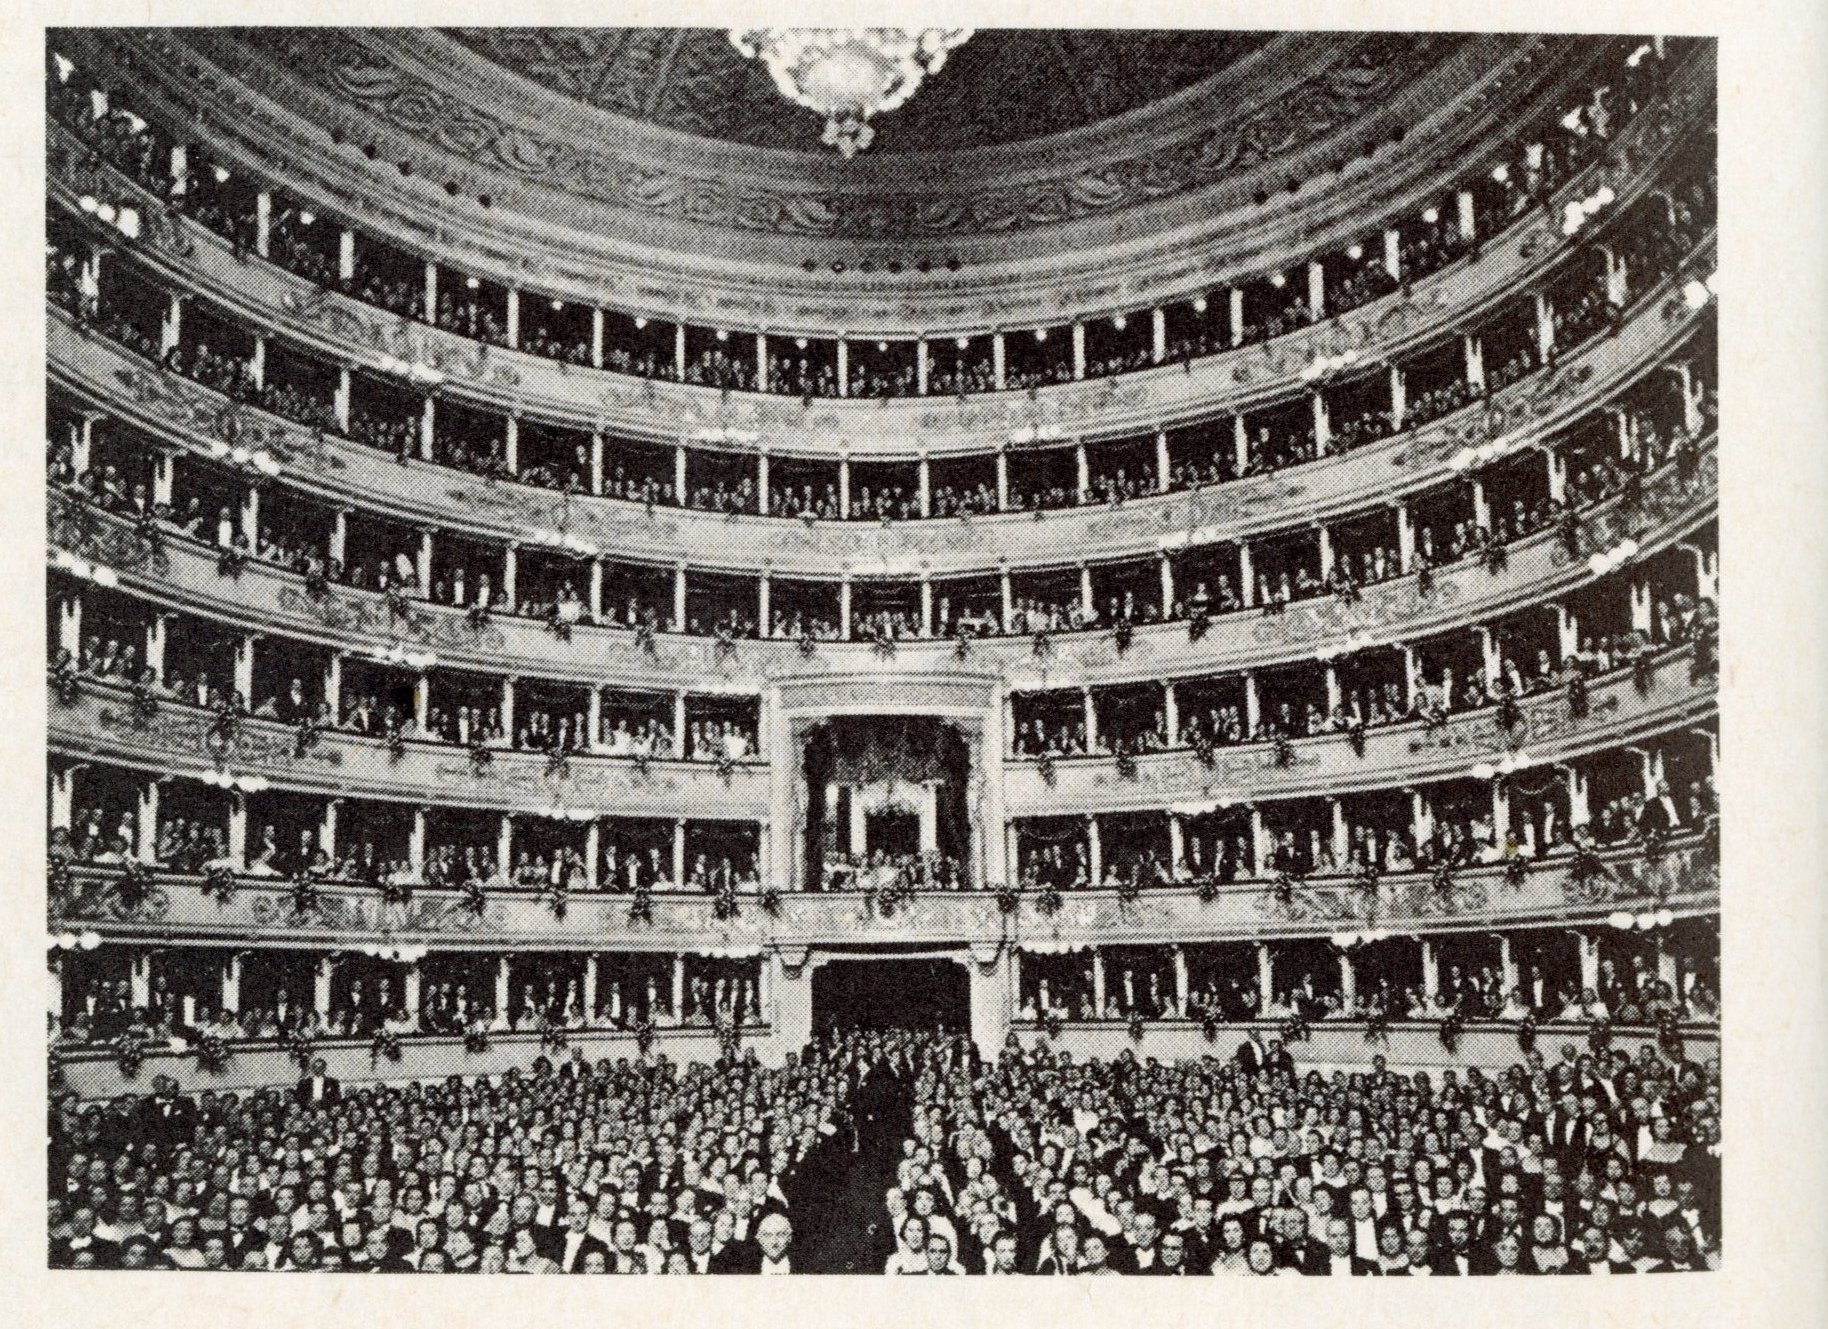  An etching of Niccolo Paganini 's audience at Teatro Scala in Milan, in 1813 